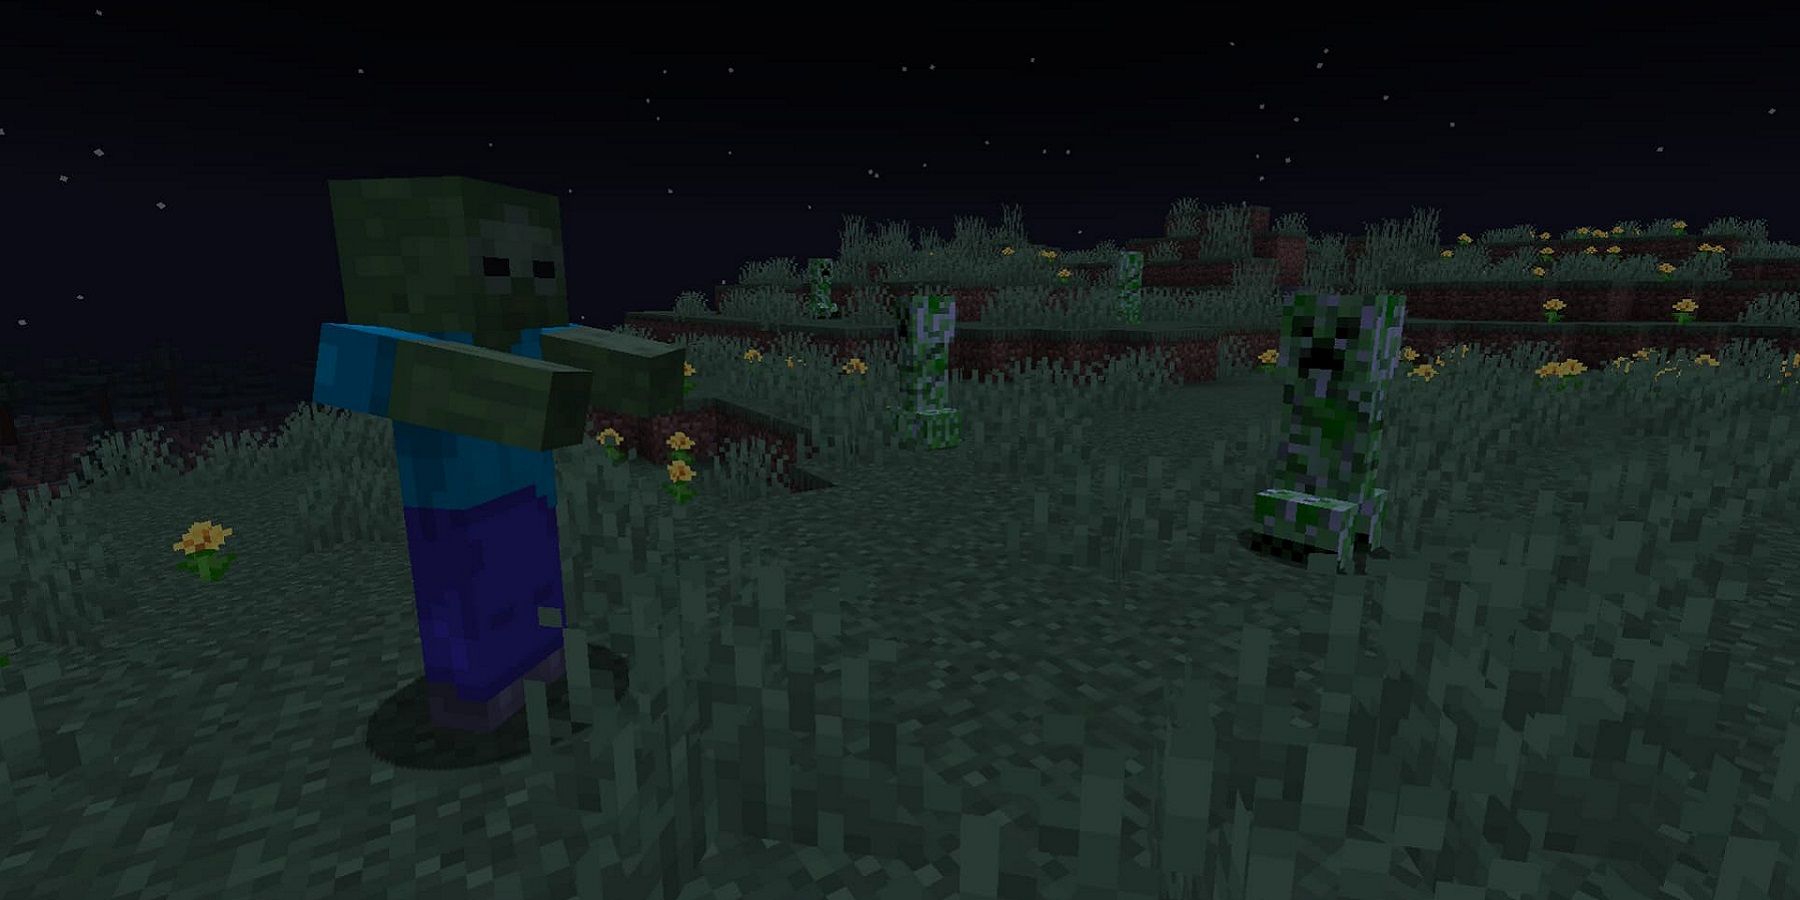 Screenshot from Minecraft showing a zombie and two creepers walking around at night.